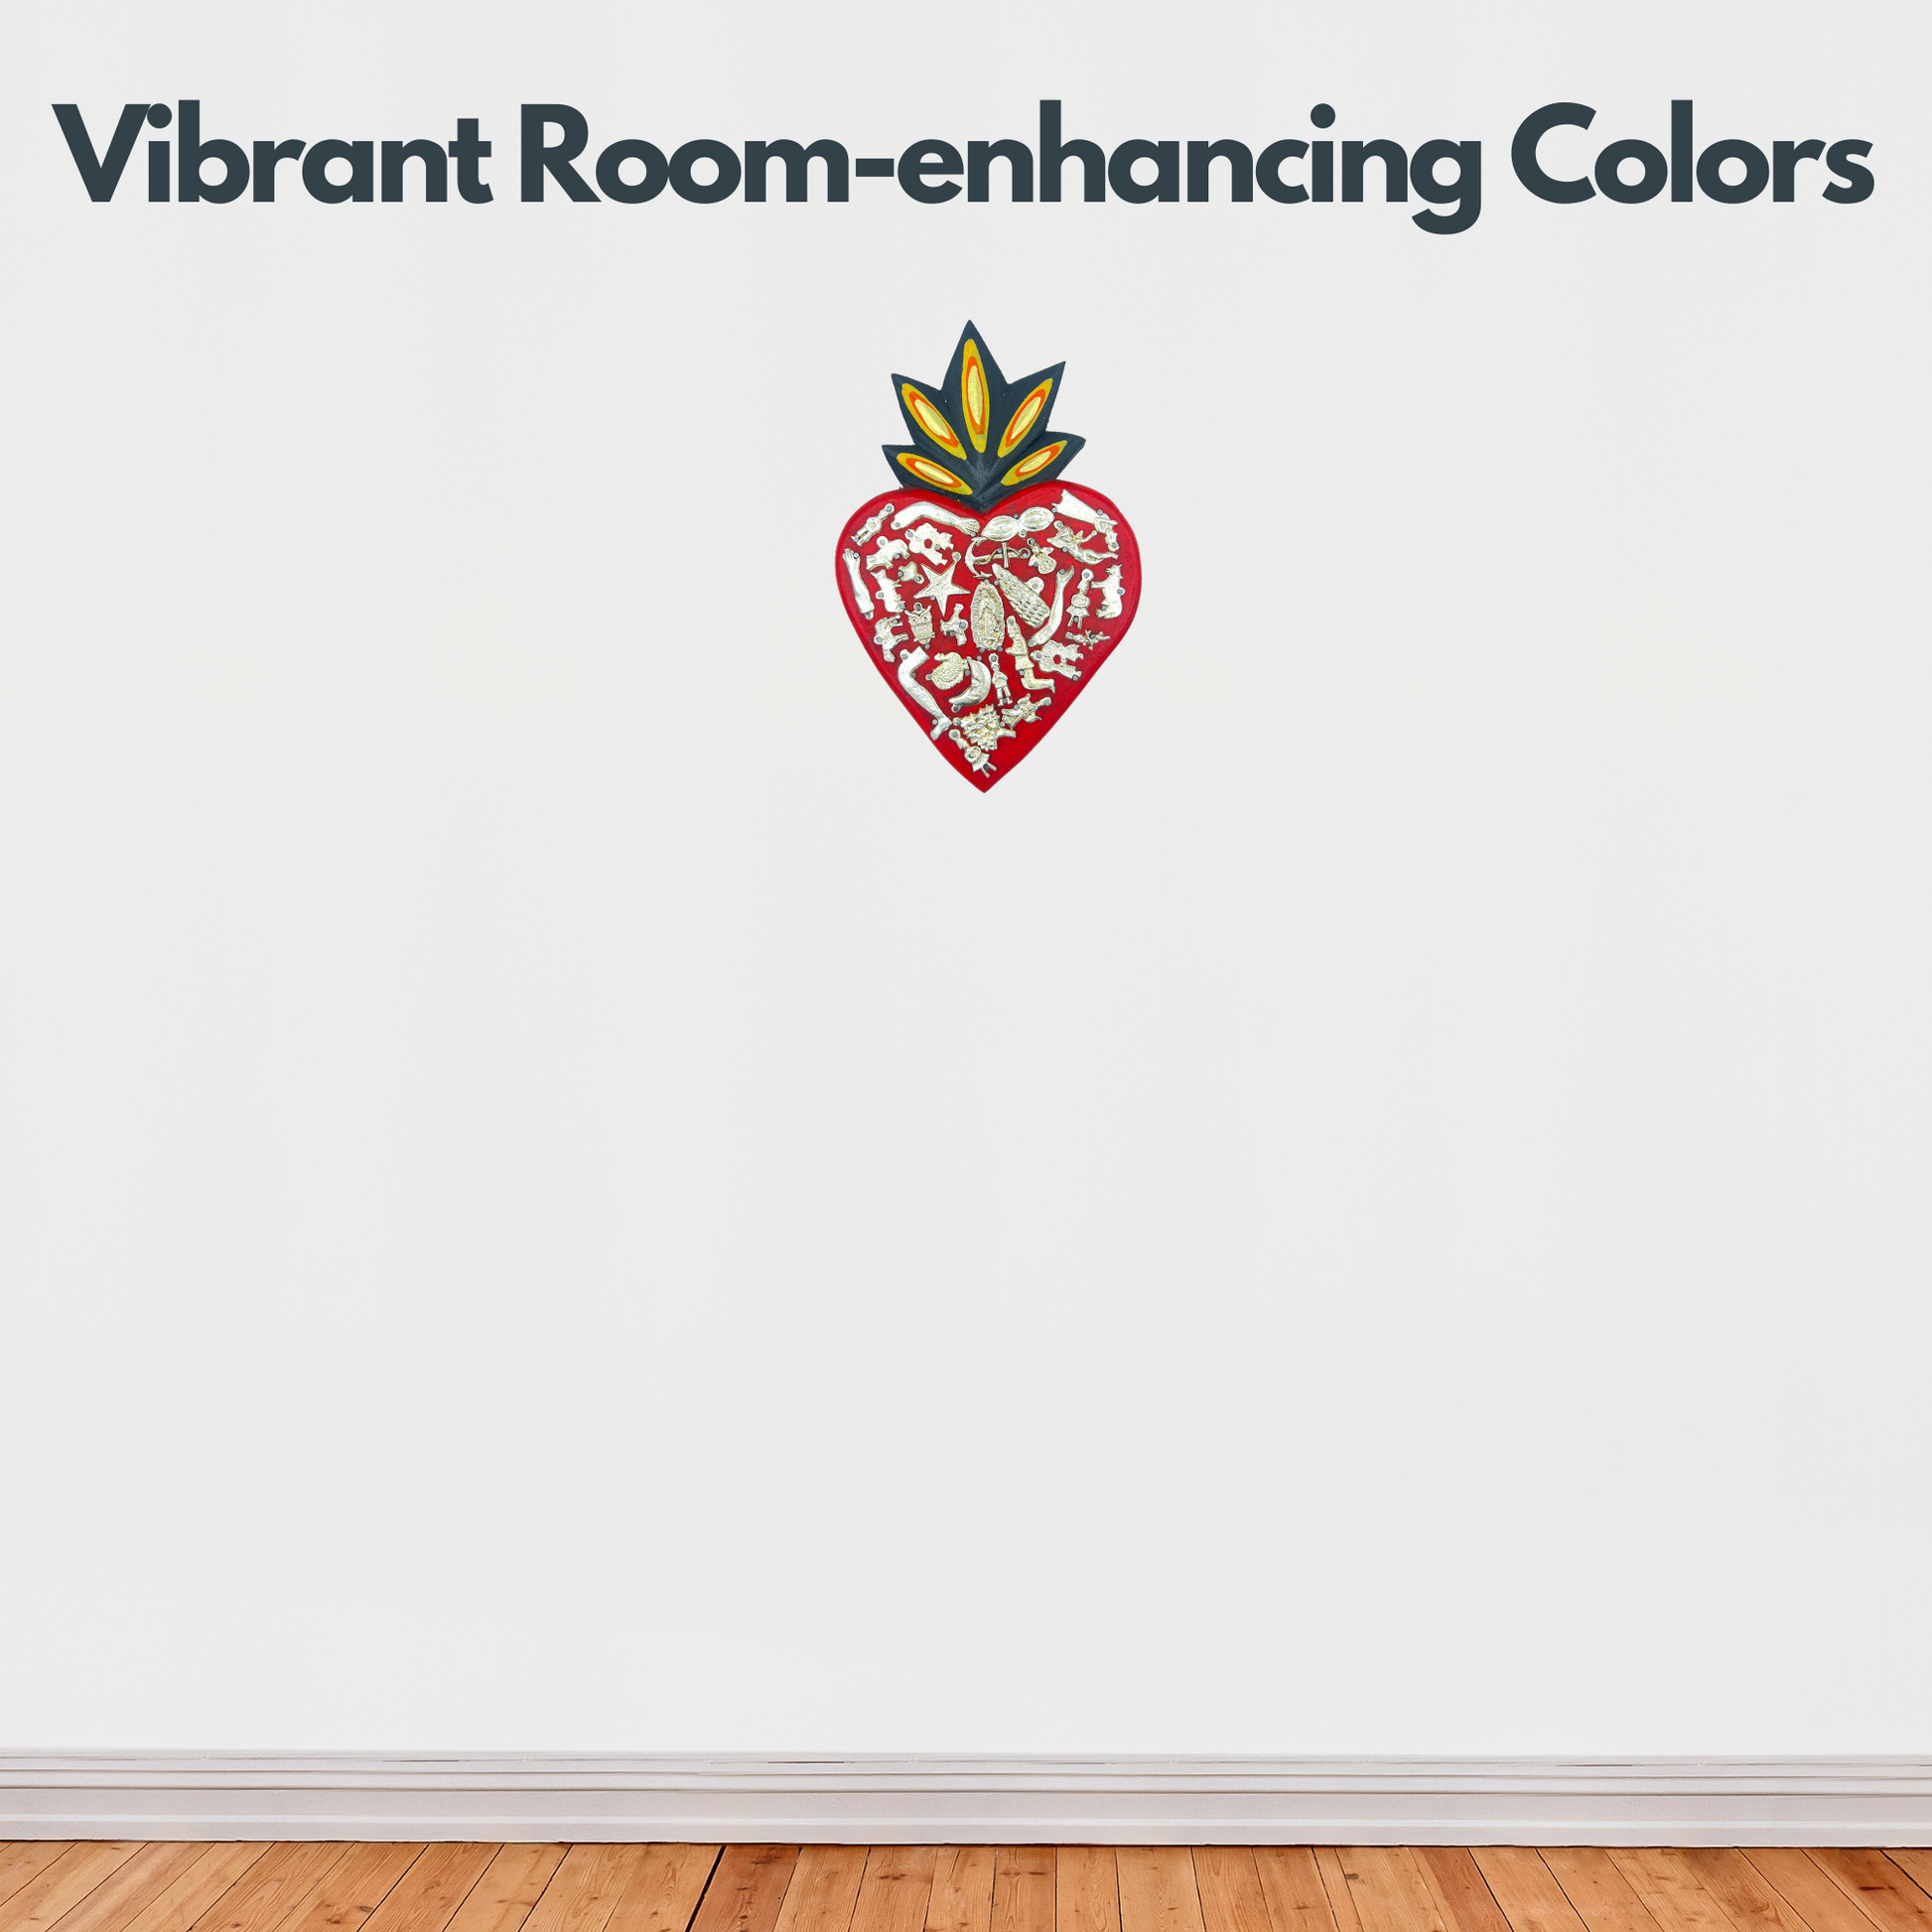 vibrant room-enhancing colors Ex Voto Wooden Sacred Heart, hand-painted by Mexican artisans, featuring colorful milagros, perfect for wall decor and enhancing your space.